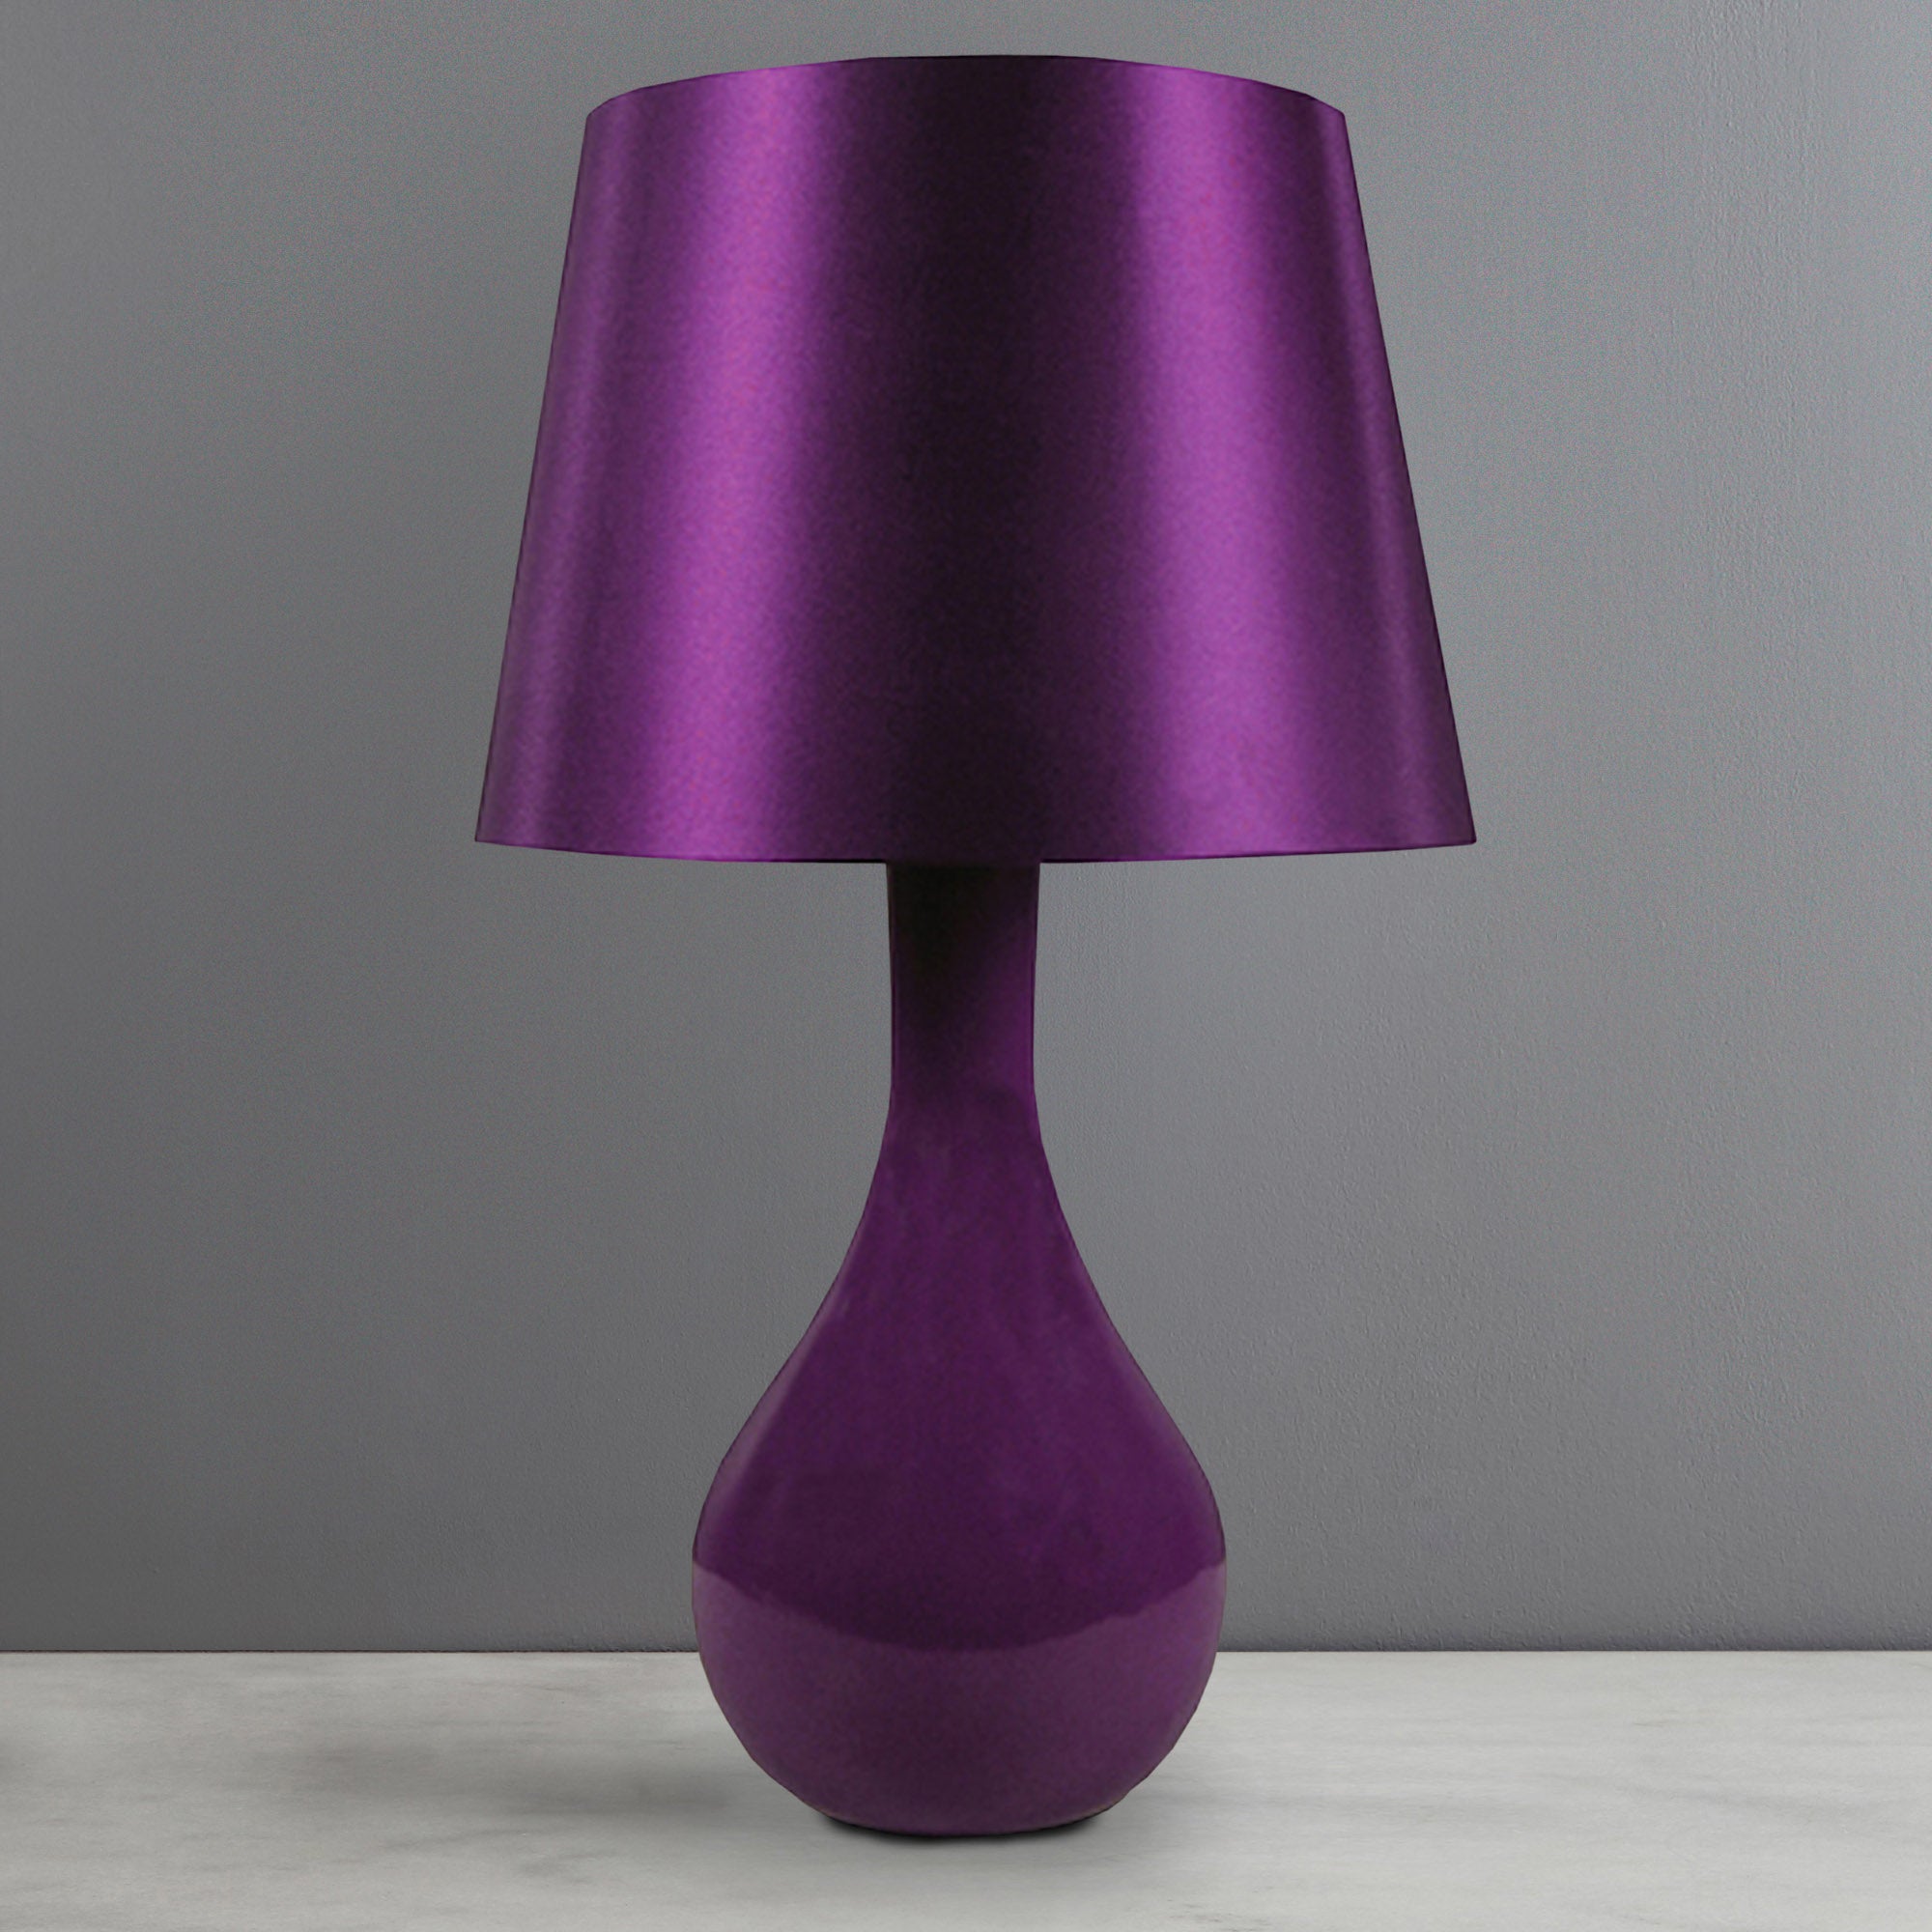 Purple table lamp | Shop for cheap Lighting and Save online